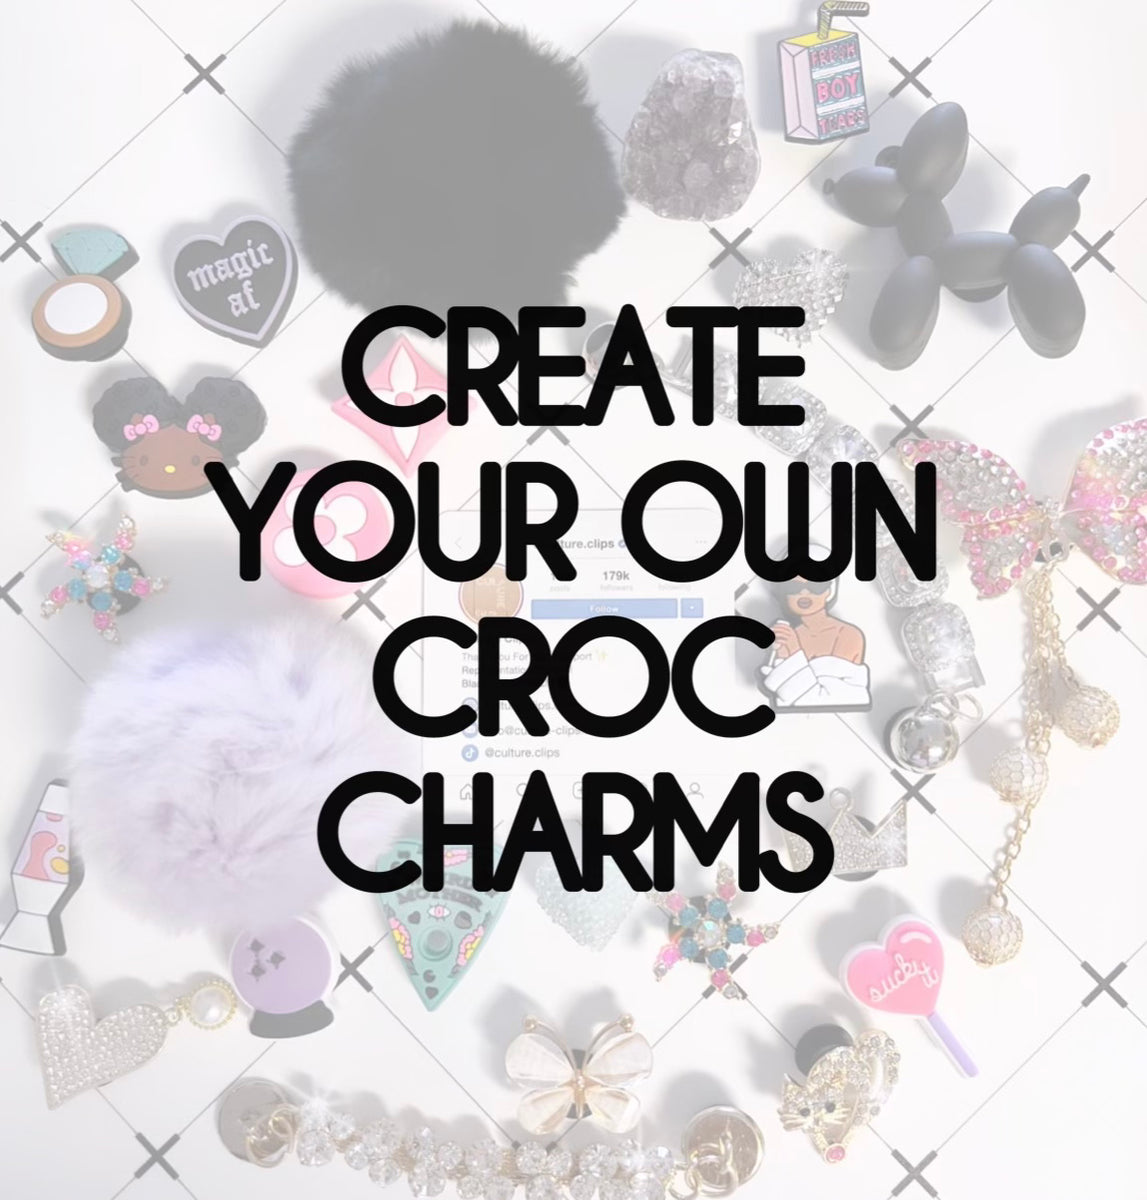 Mira Medals - Check out these awesome Croc Charms we produced for our  client! They are so cool. Hit us up for your very own custom croc charms.  Great for artists, fundraisers